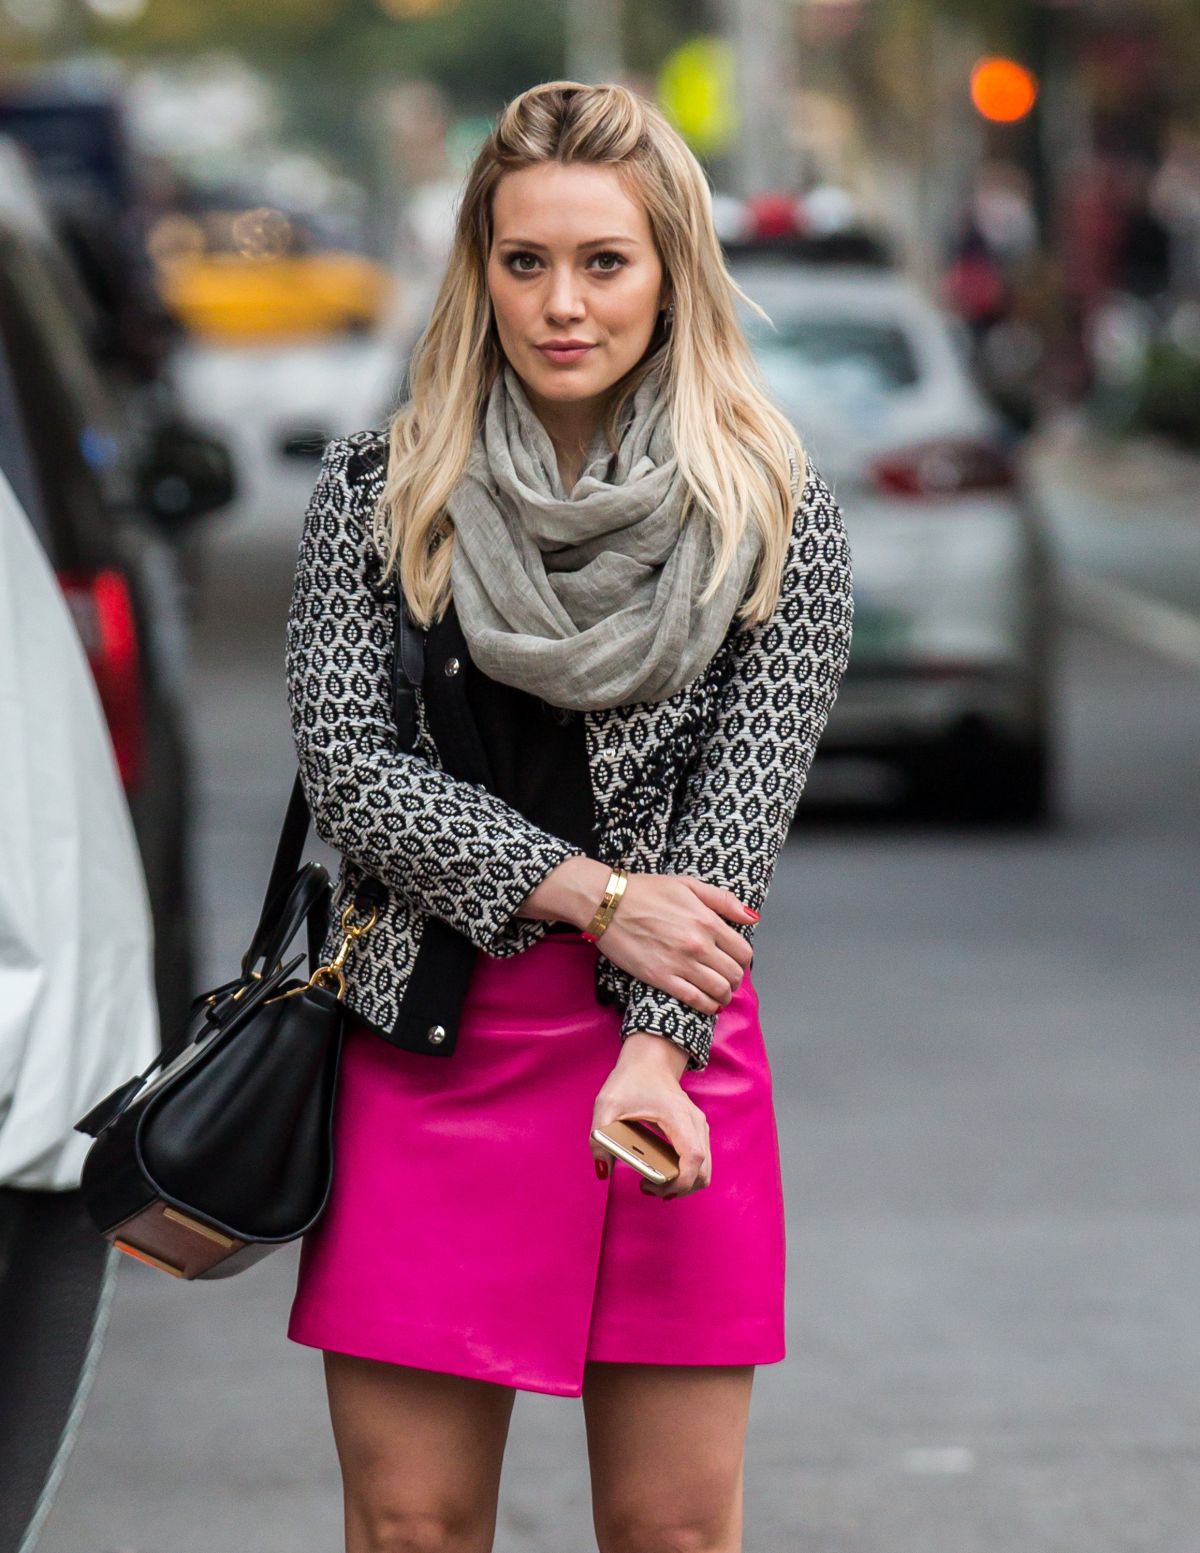 HILARY DUFF on the Set of Younger in New York.